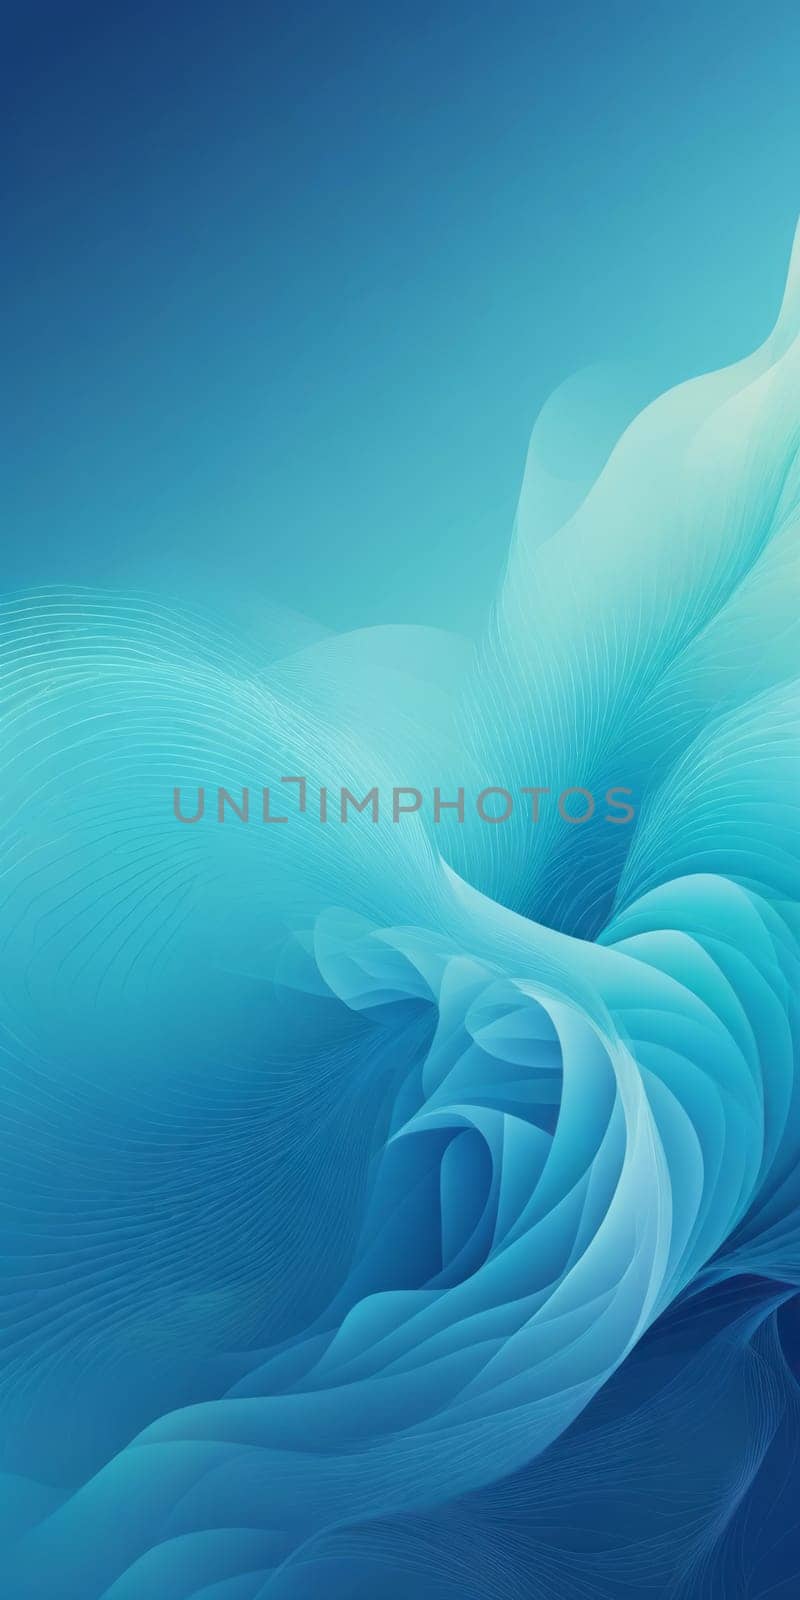 Fractal Shapes in Aqua and Blue by nkotlyar